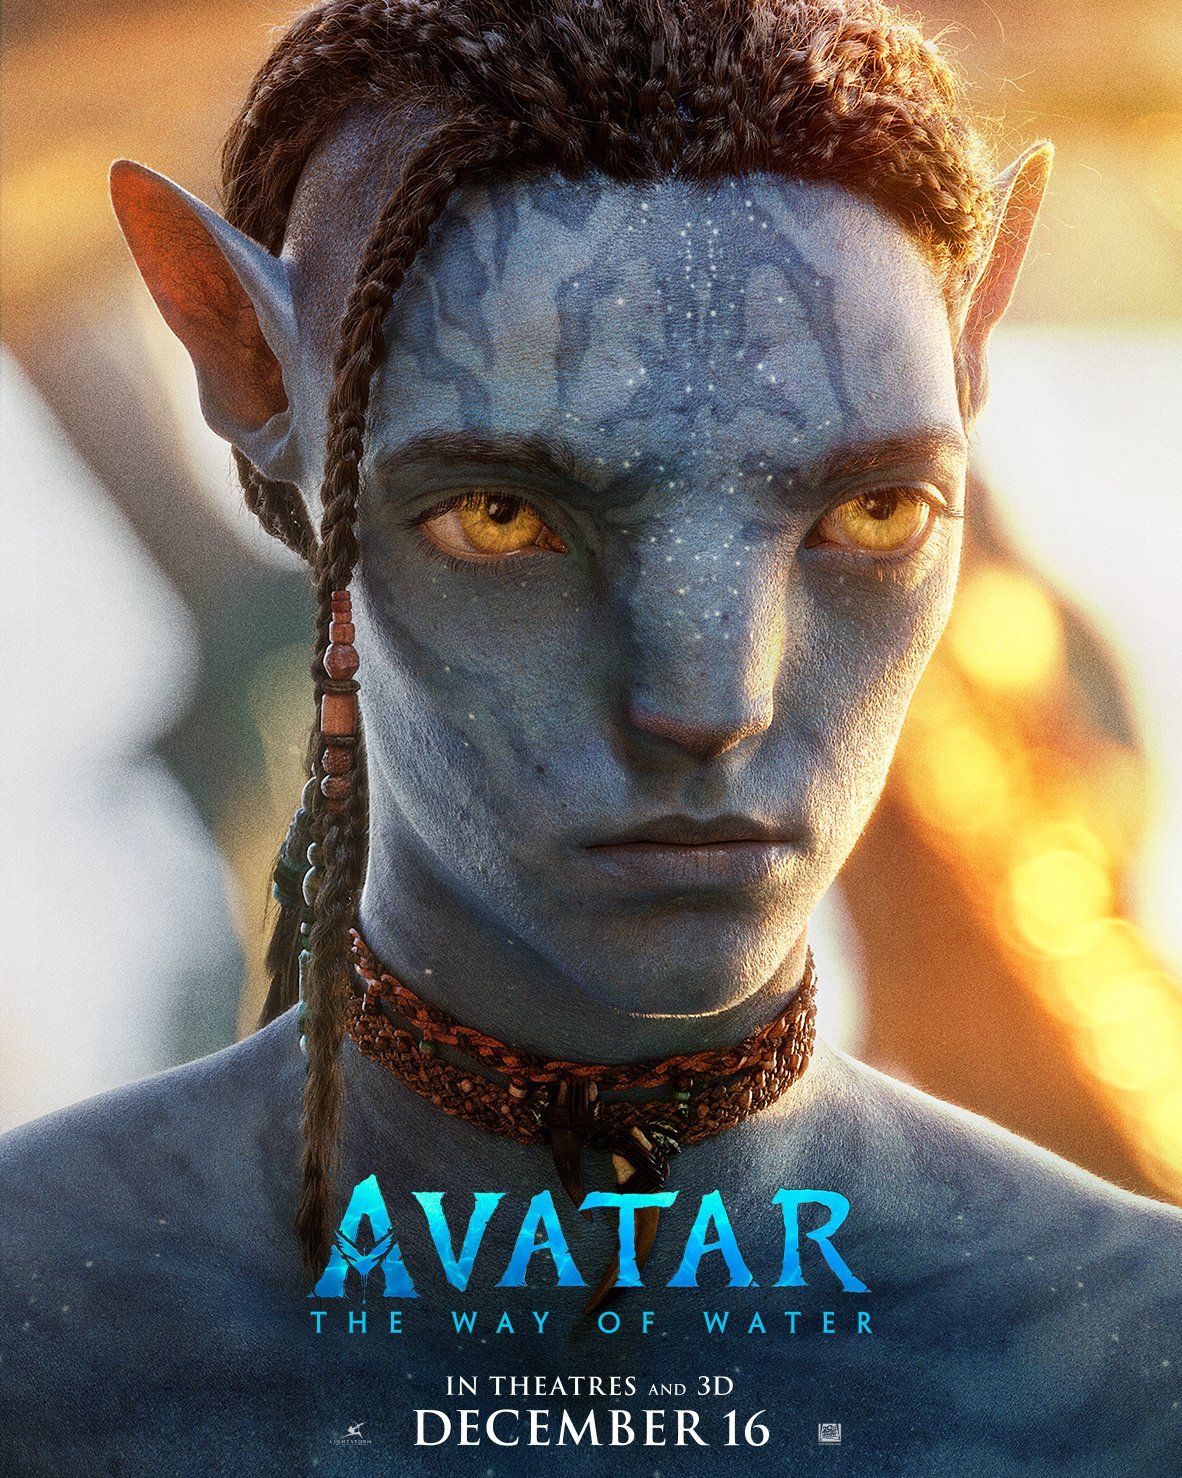 Avatar The Way Of Water Posters Showcase The Films New Characters 3852